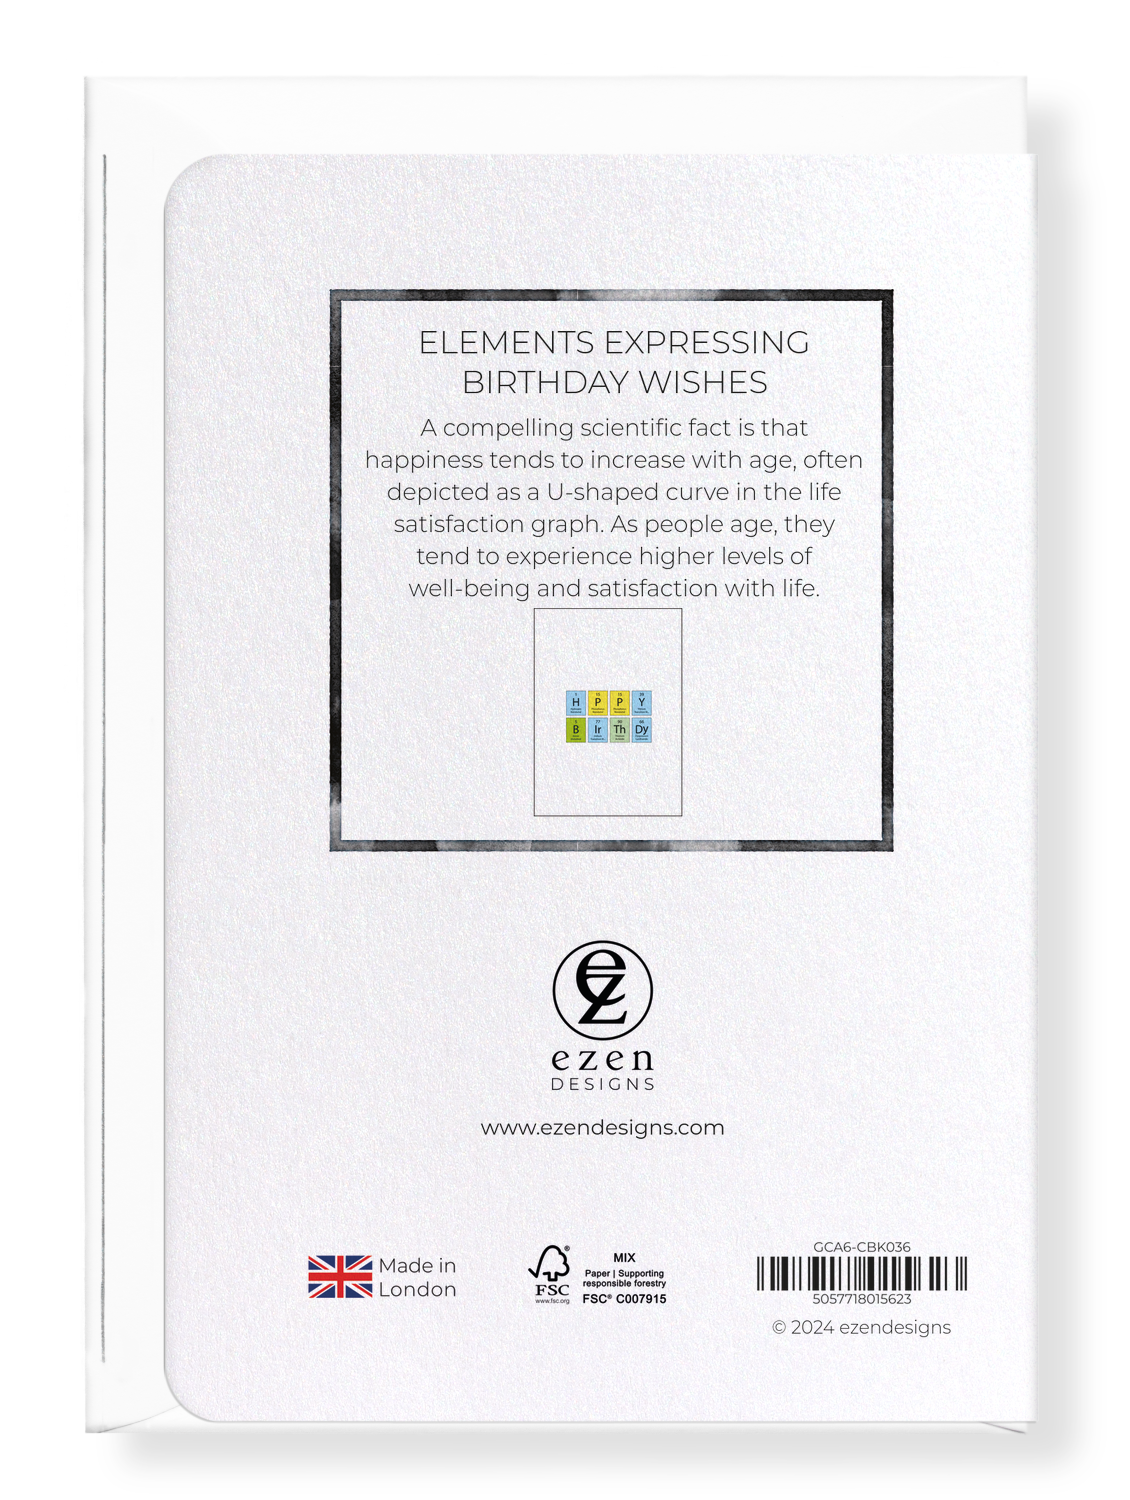 Ezen Designs - Elements Expressing Birthday Wishes - Greeting Card - Back